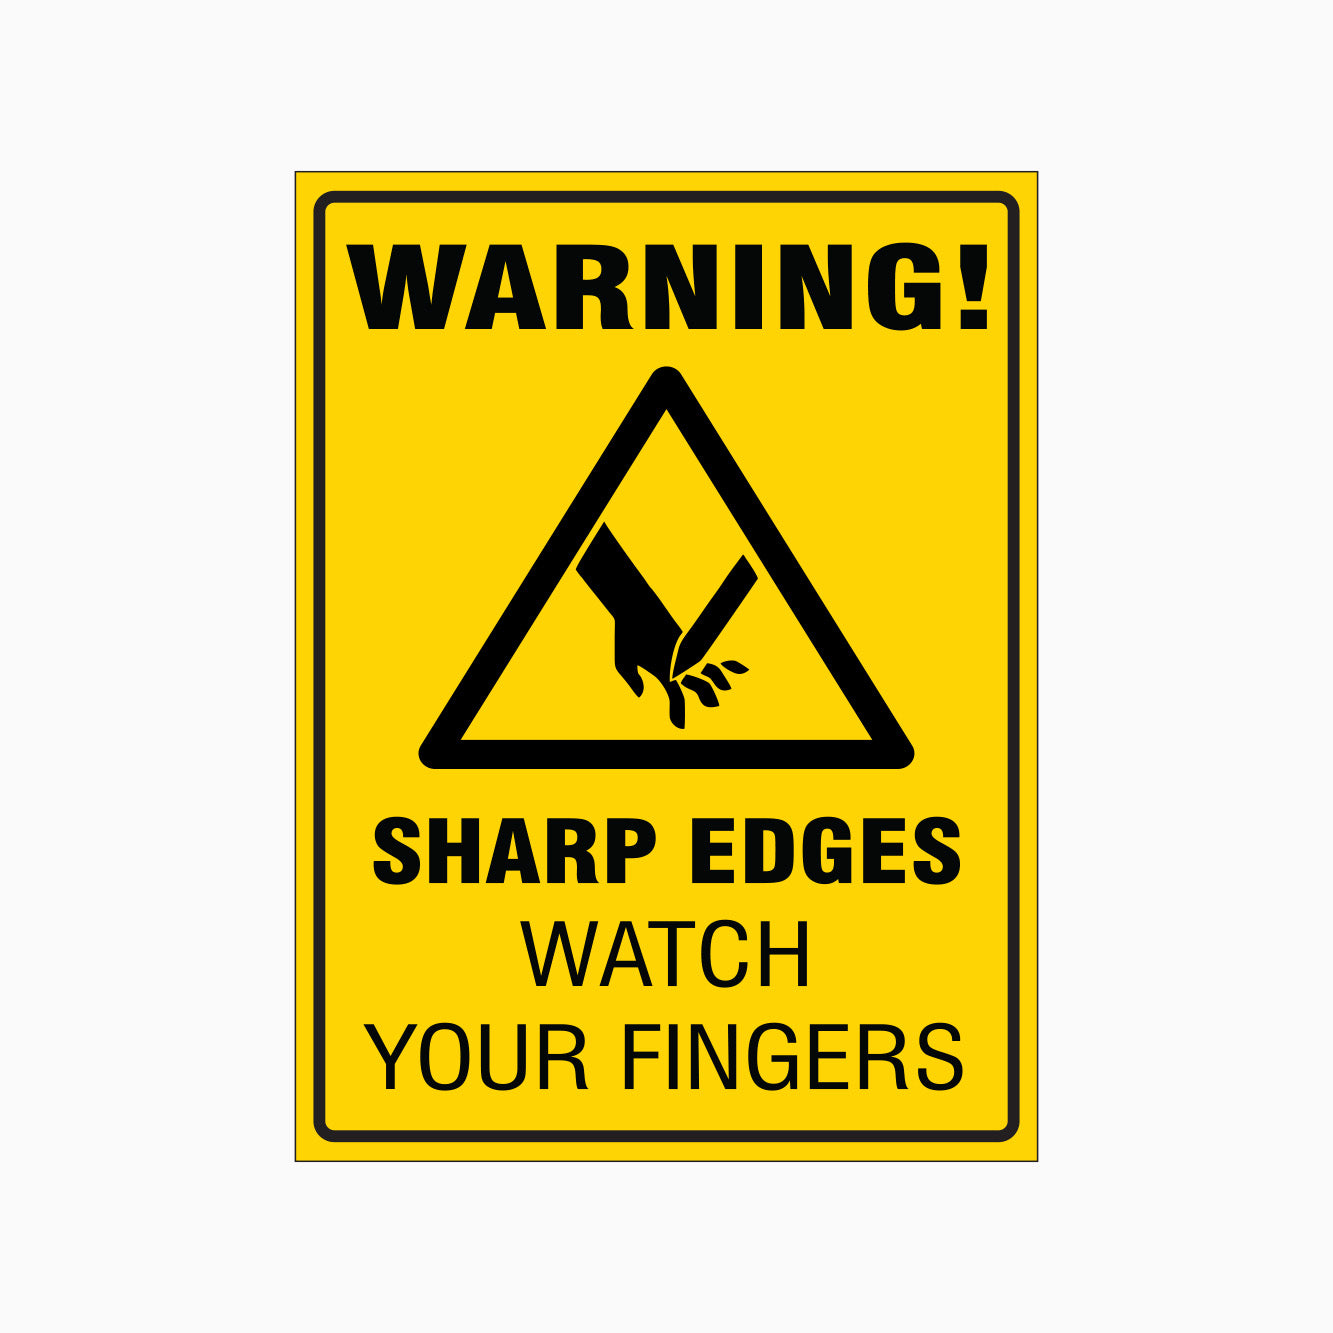 WARNING SIGN - SHARP EDGES WATCH YOUR FINGERS SIGN - GET SIGNS